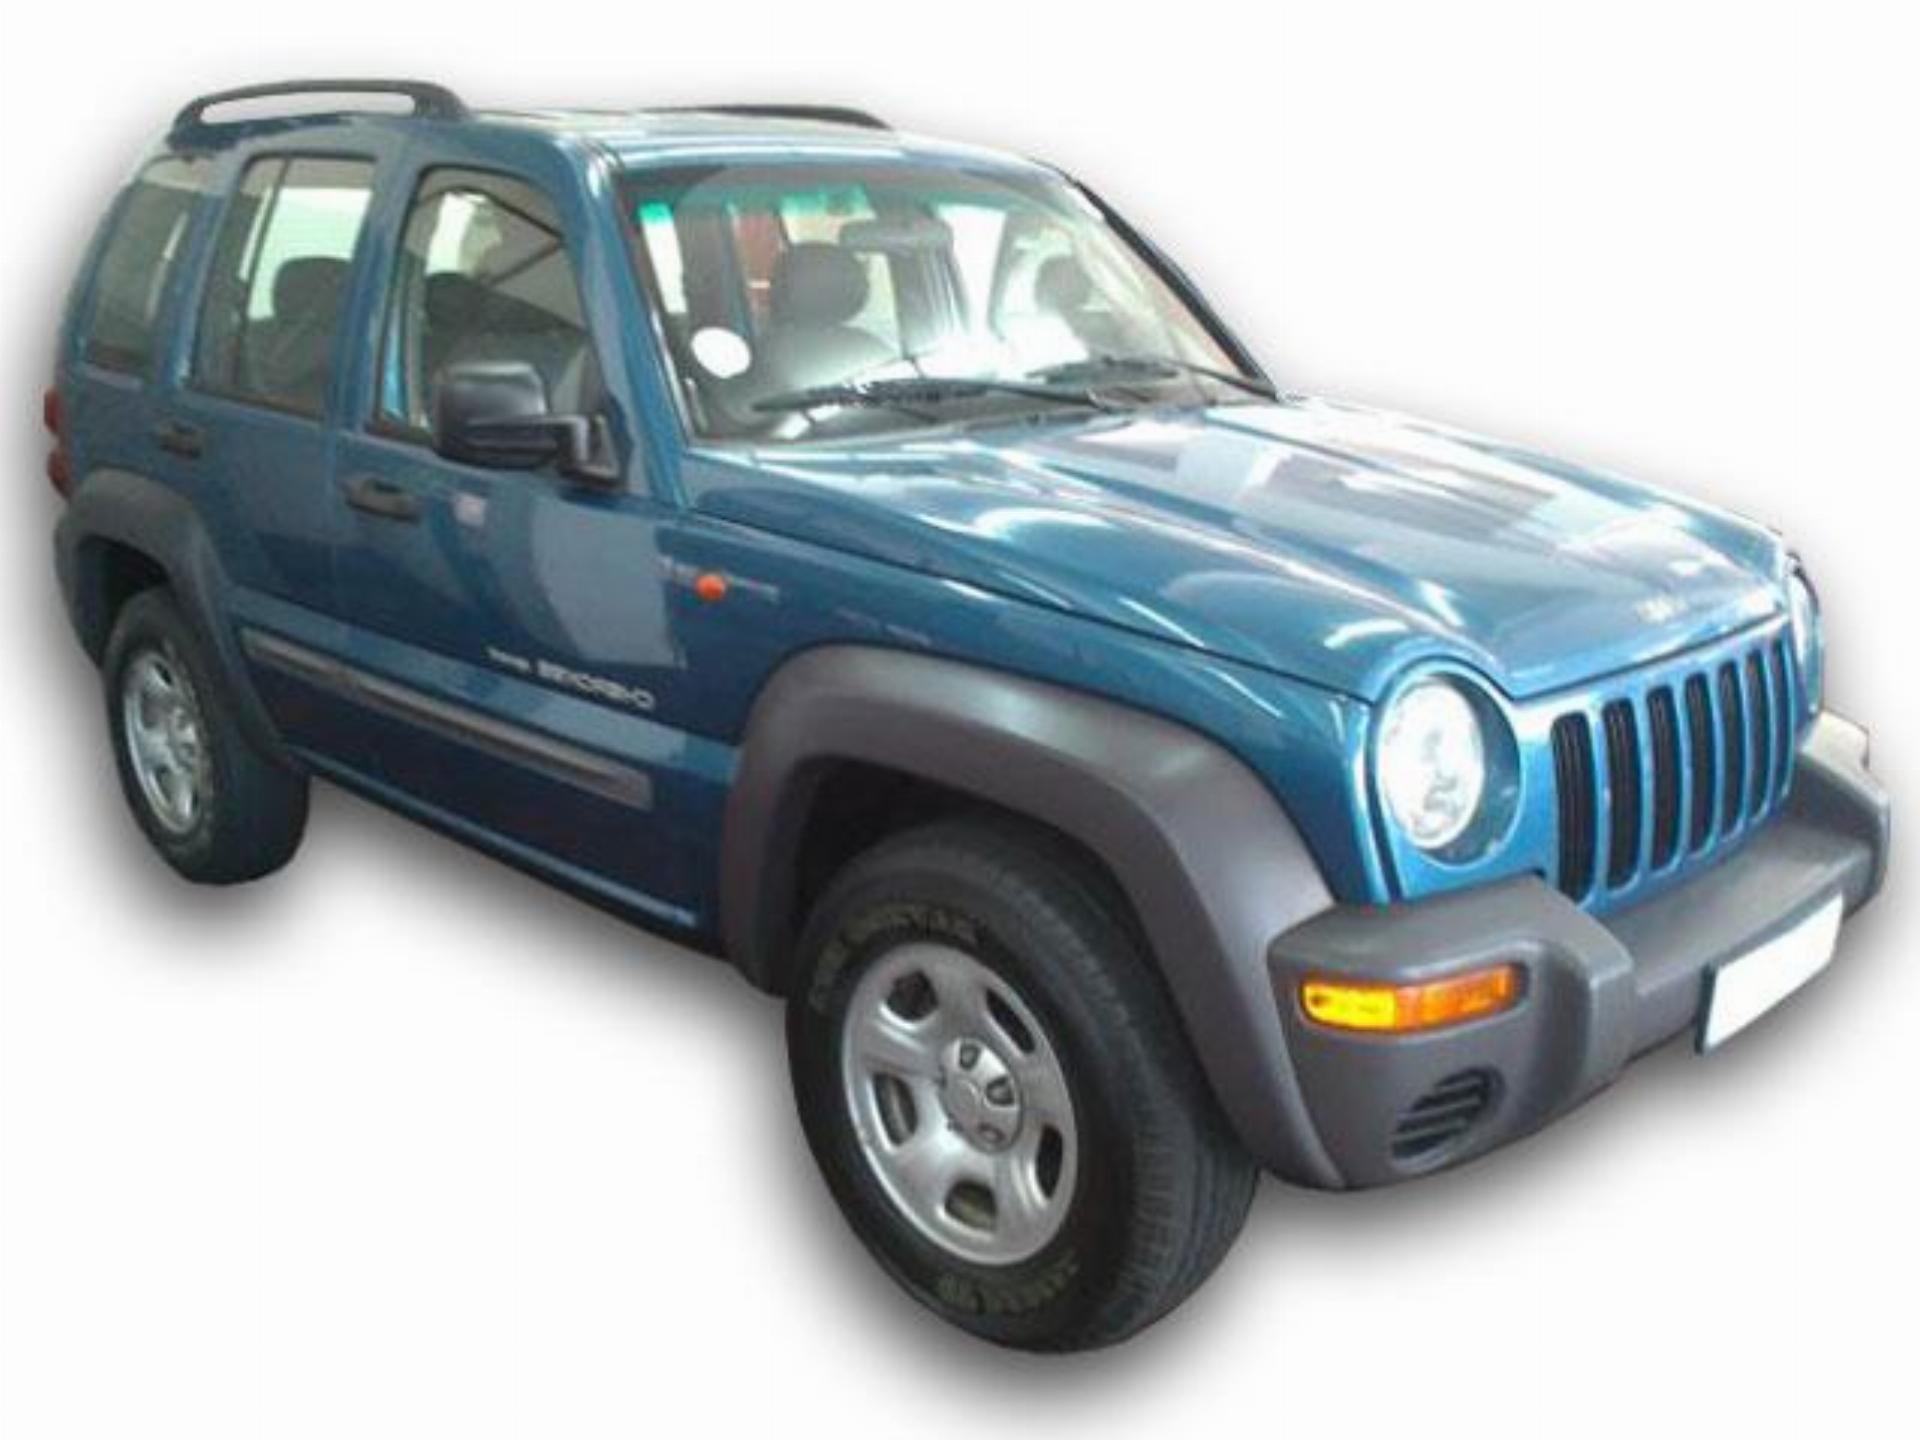 Used Jeep Cherokee 2.4 Sport 4X4 2003 on auction PV1002032